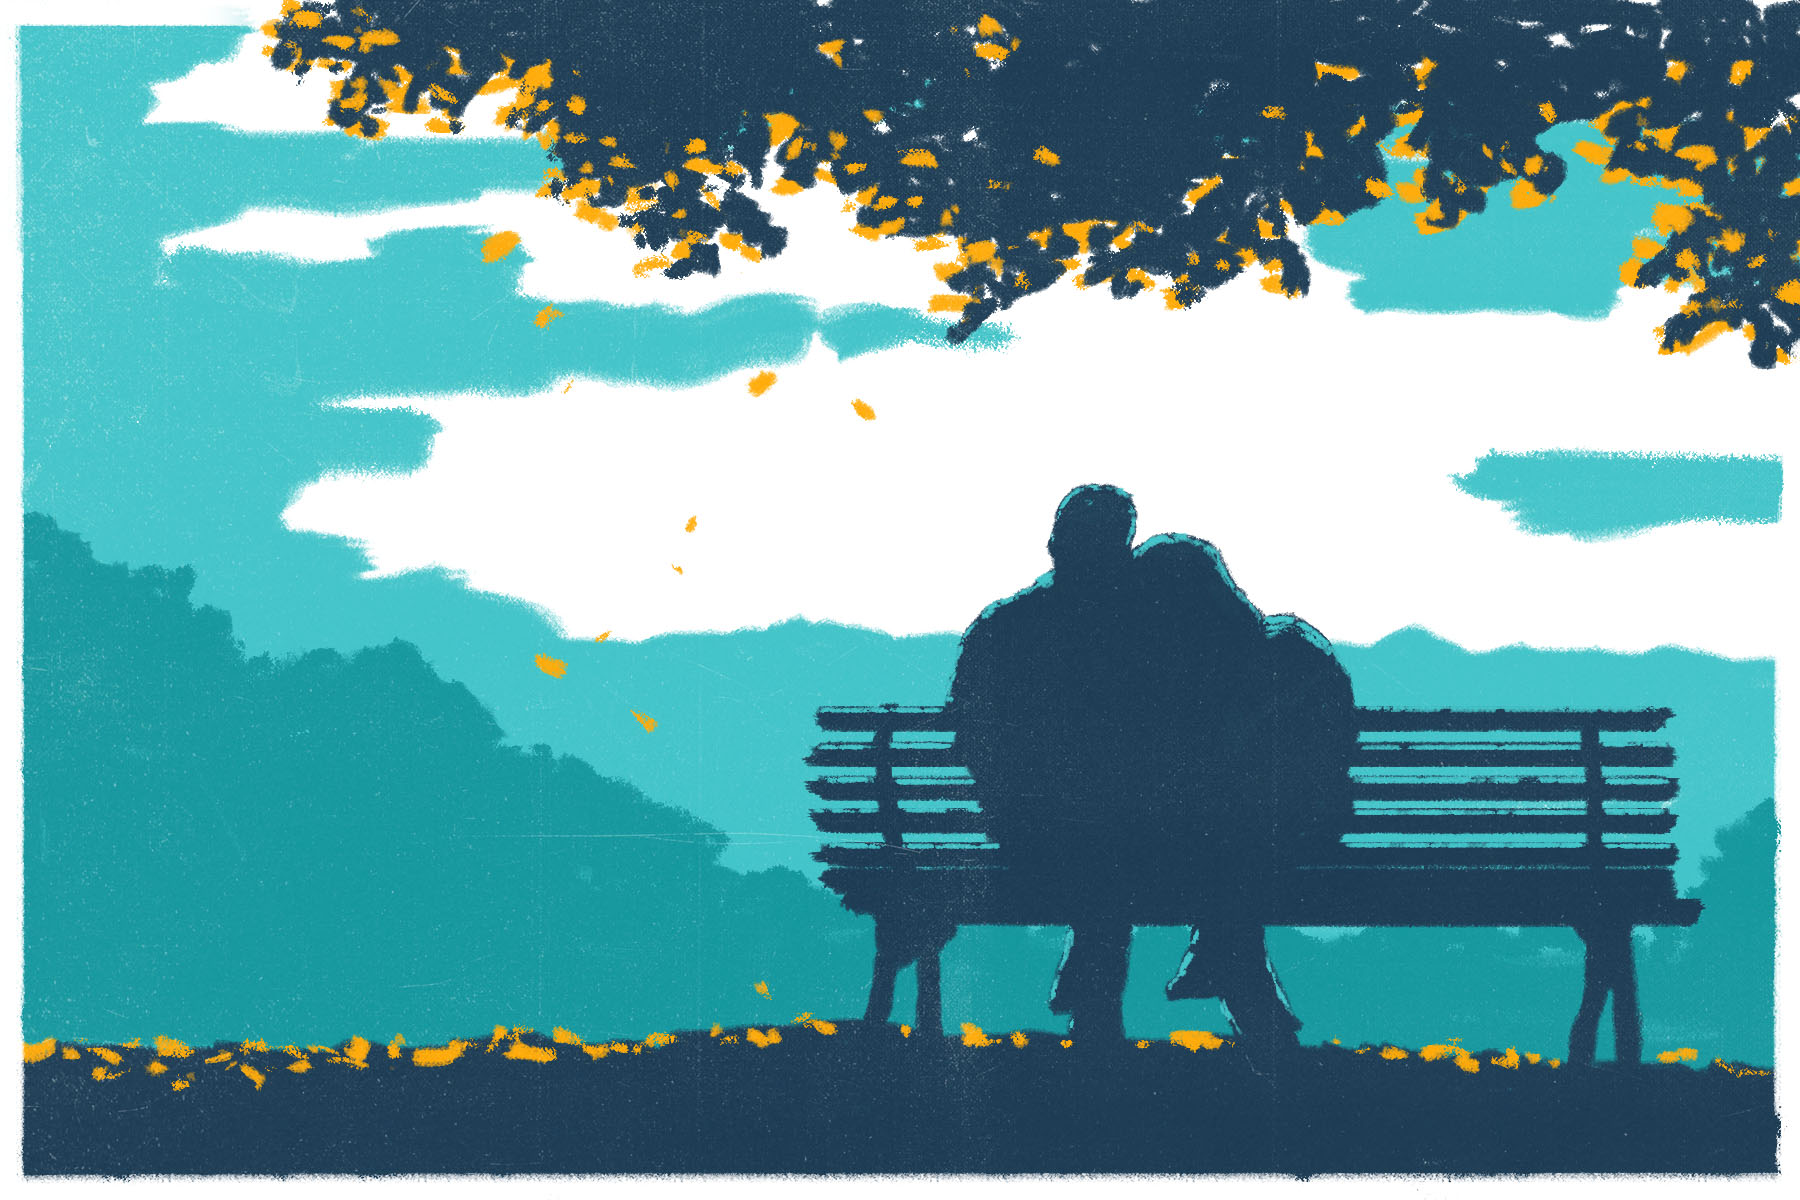 An illustration of two people sitting on a bench, looking at a view